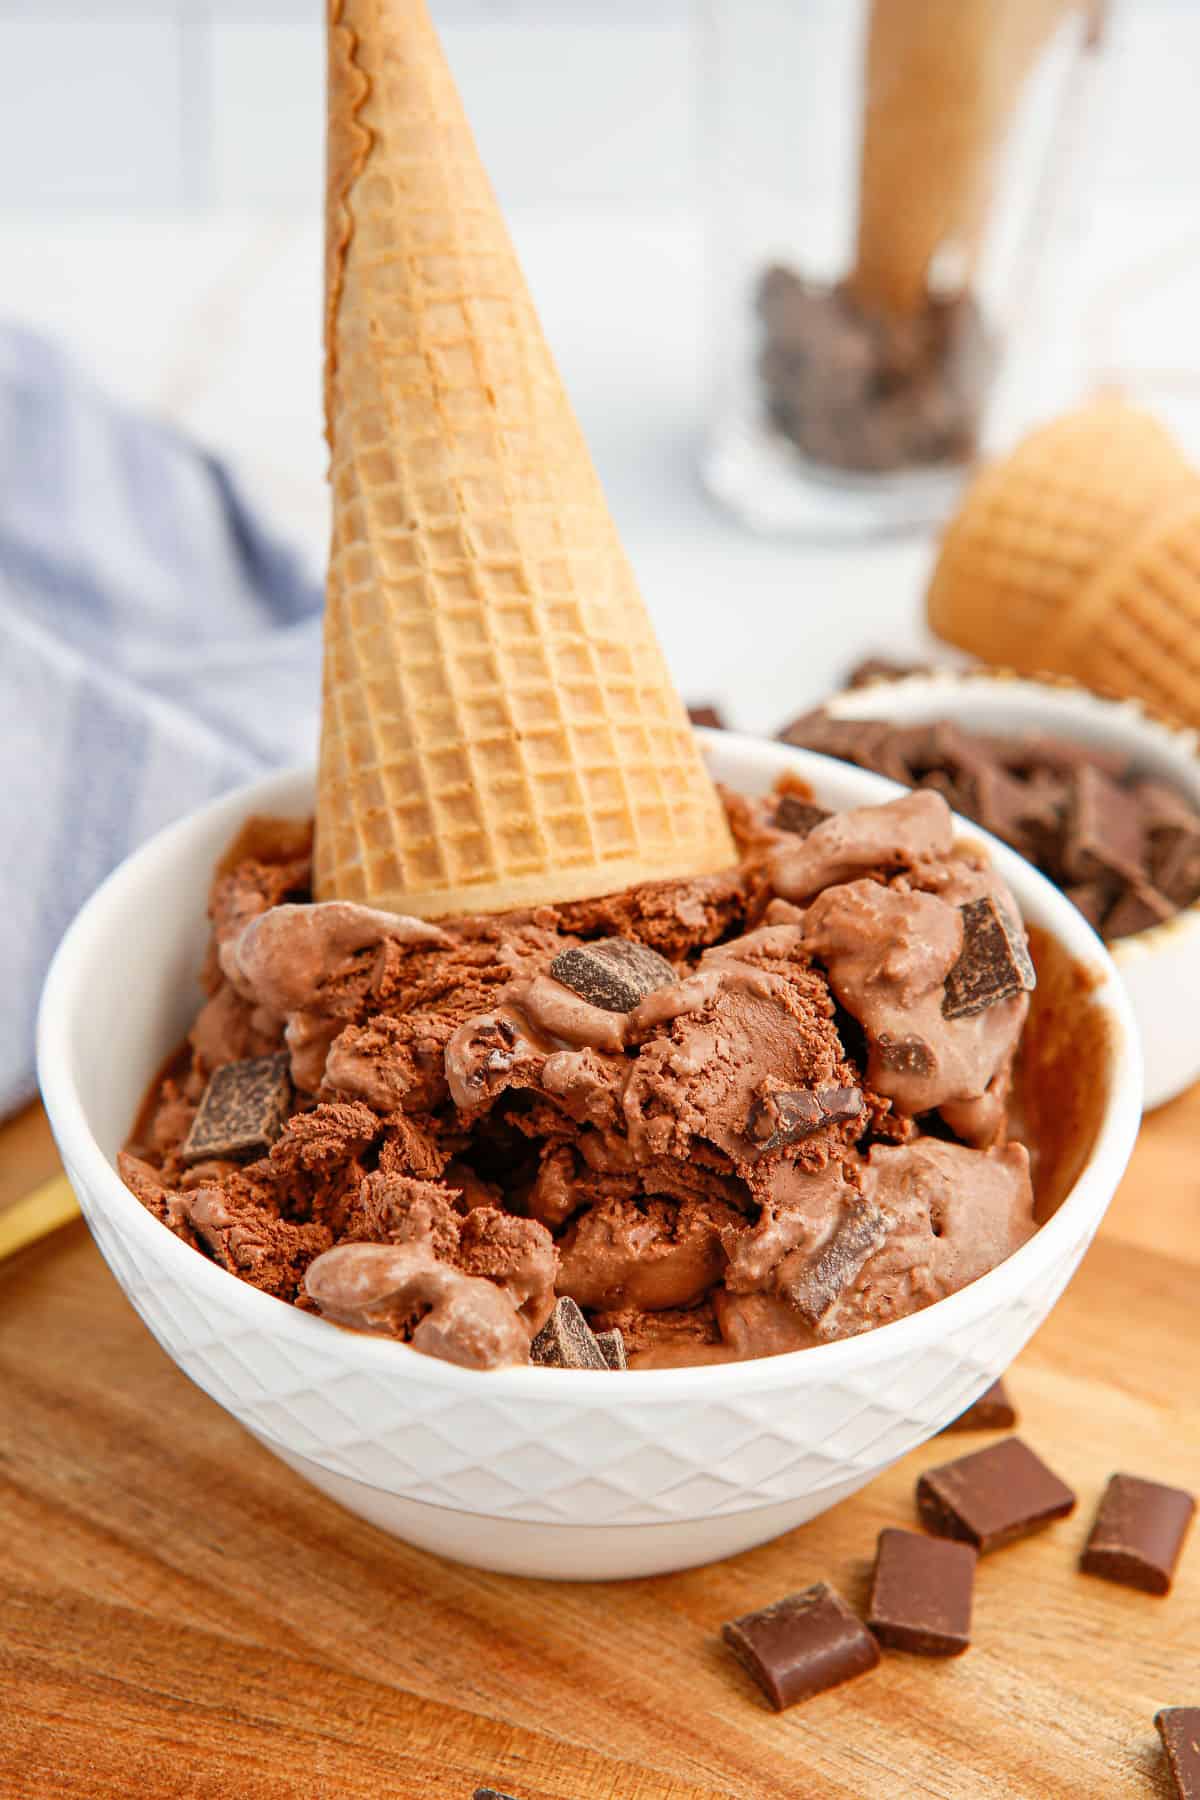 Chocolate ice cream with chocolate chunks in a white bowl and sugar cone on top.